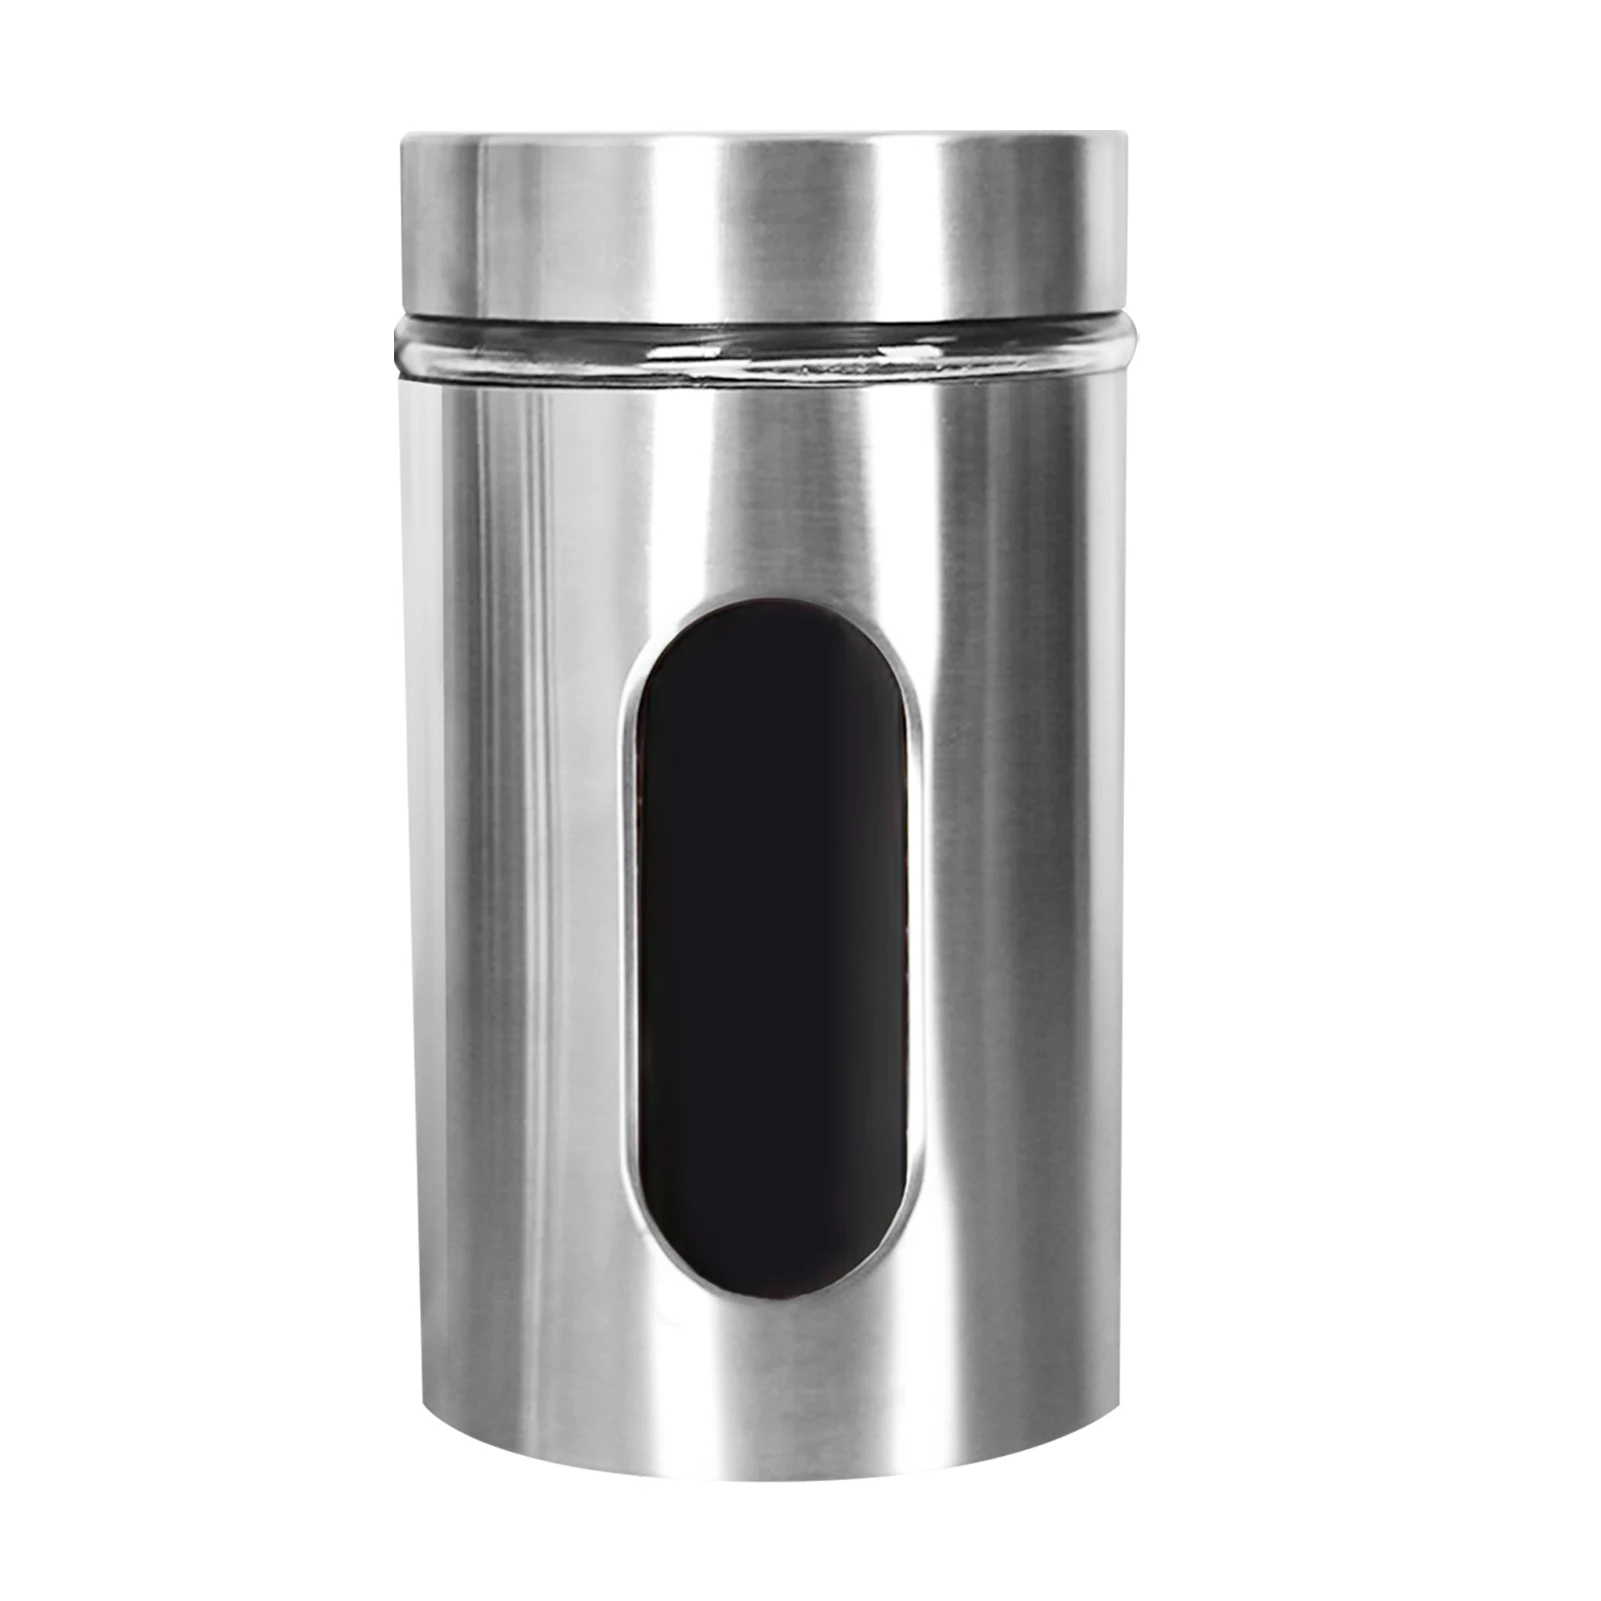 

950ml Silver Glass Viewing Window Dried Fruit Storage Kitchen Canister Food Stainless Steel Home Use Sugar Caddy Sealing